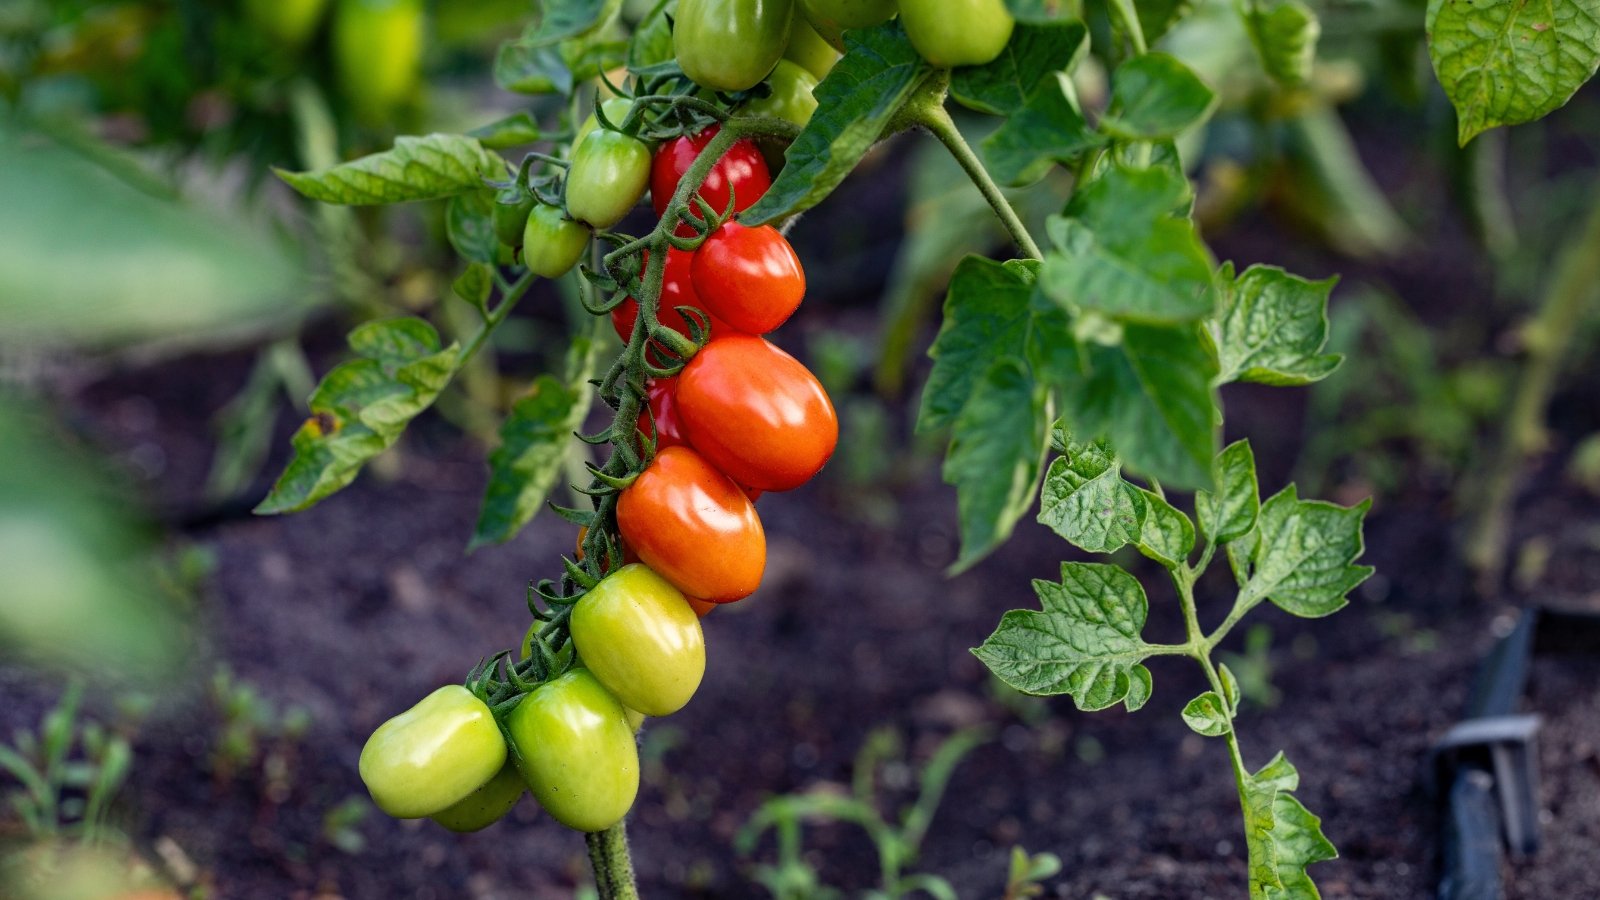 Close-up of a cluster of plump, ripe cherry tomatoes nestled among a backdrop of lush, verdant green foliage in a well-tended garden bed, with the vibrant red fruits shining brightly against the backdrop of healthy leaves.
